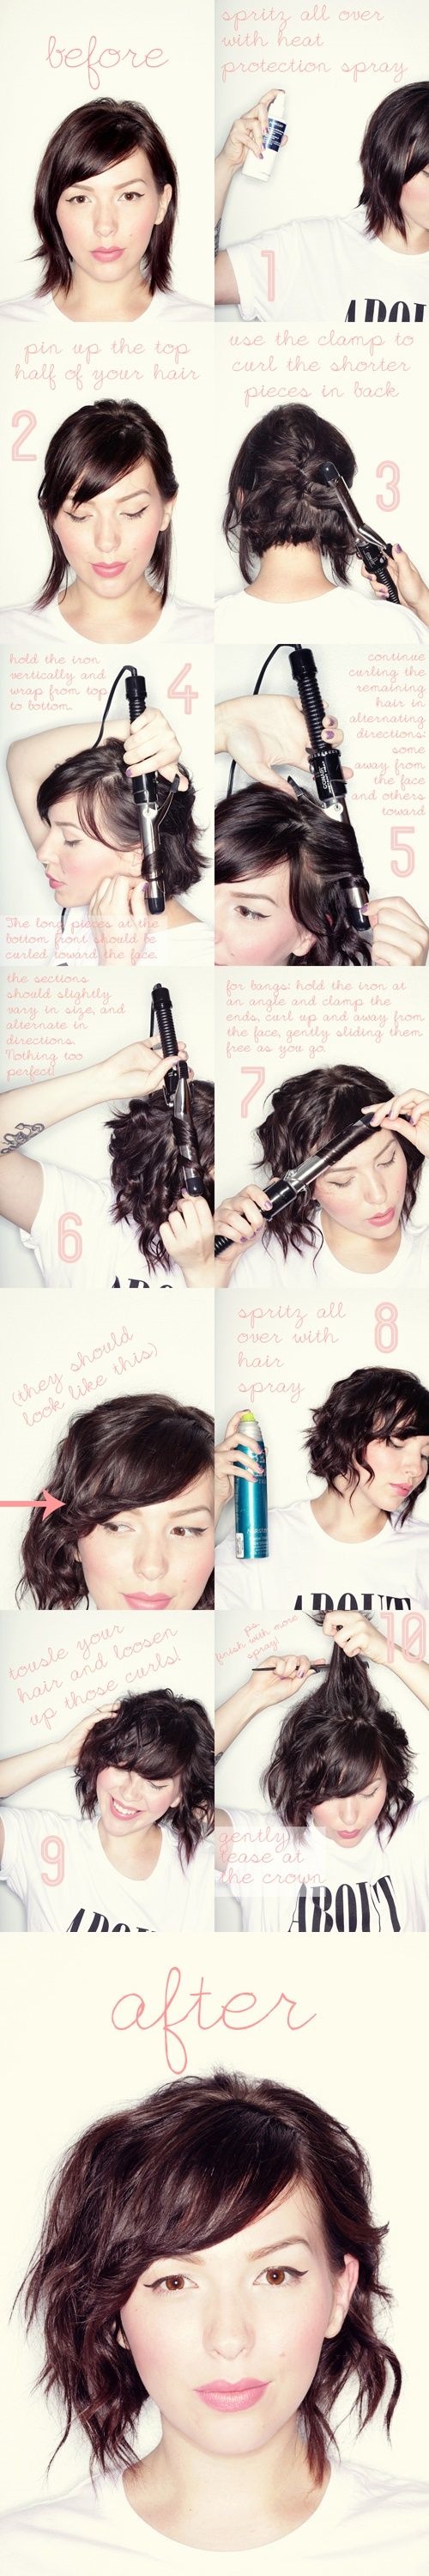 Ways to Style Short Hair9